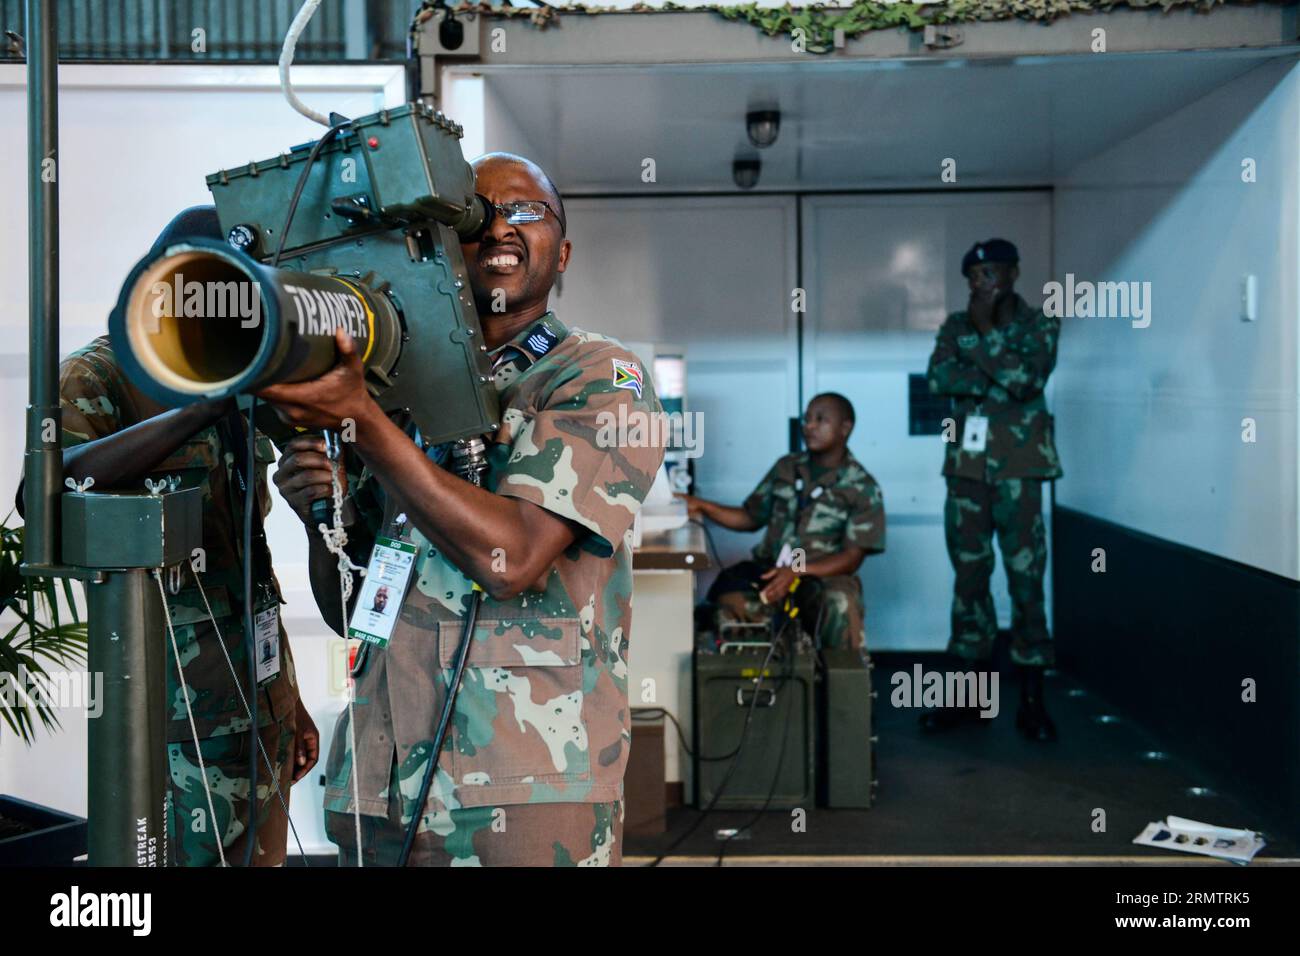 (140917) -- CENTURION, Sept. 17, 2014 -- A South African military officer tests an ultra short missile launch system during the first day of Africa Aerospace and Defense 2014 Exhibition in Waterkoof Air Force Basement on the southern outskirts of the administrative capital of Pretoria, on Sept. 17, 2014. The exhibition is the largest one of its kind in Africa. A total of 347 exhibitors from 26 countries and regions took part in the biennial exhibition which will last till Sept. 21. ) (djj) SOUTH AFRICA-PRETORIA-CENTURION-AFRICA AEROSPACE AND DEFENSE 2014 EXHIBITION ZhaixJianlan PUBLICATIONxNOT Stock Photo